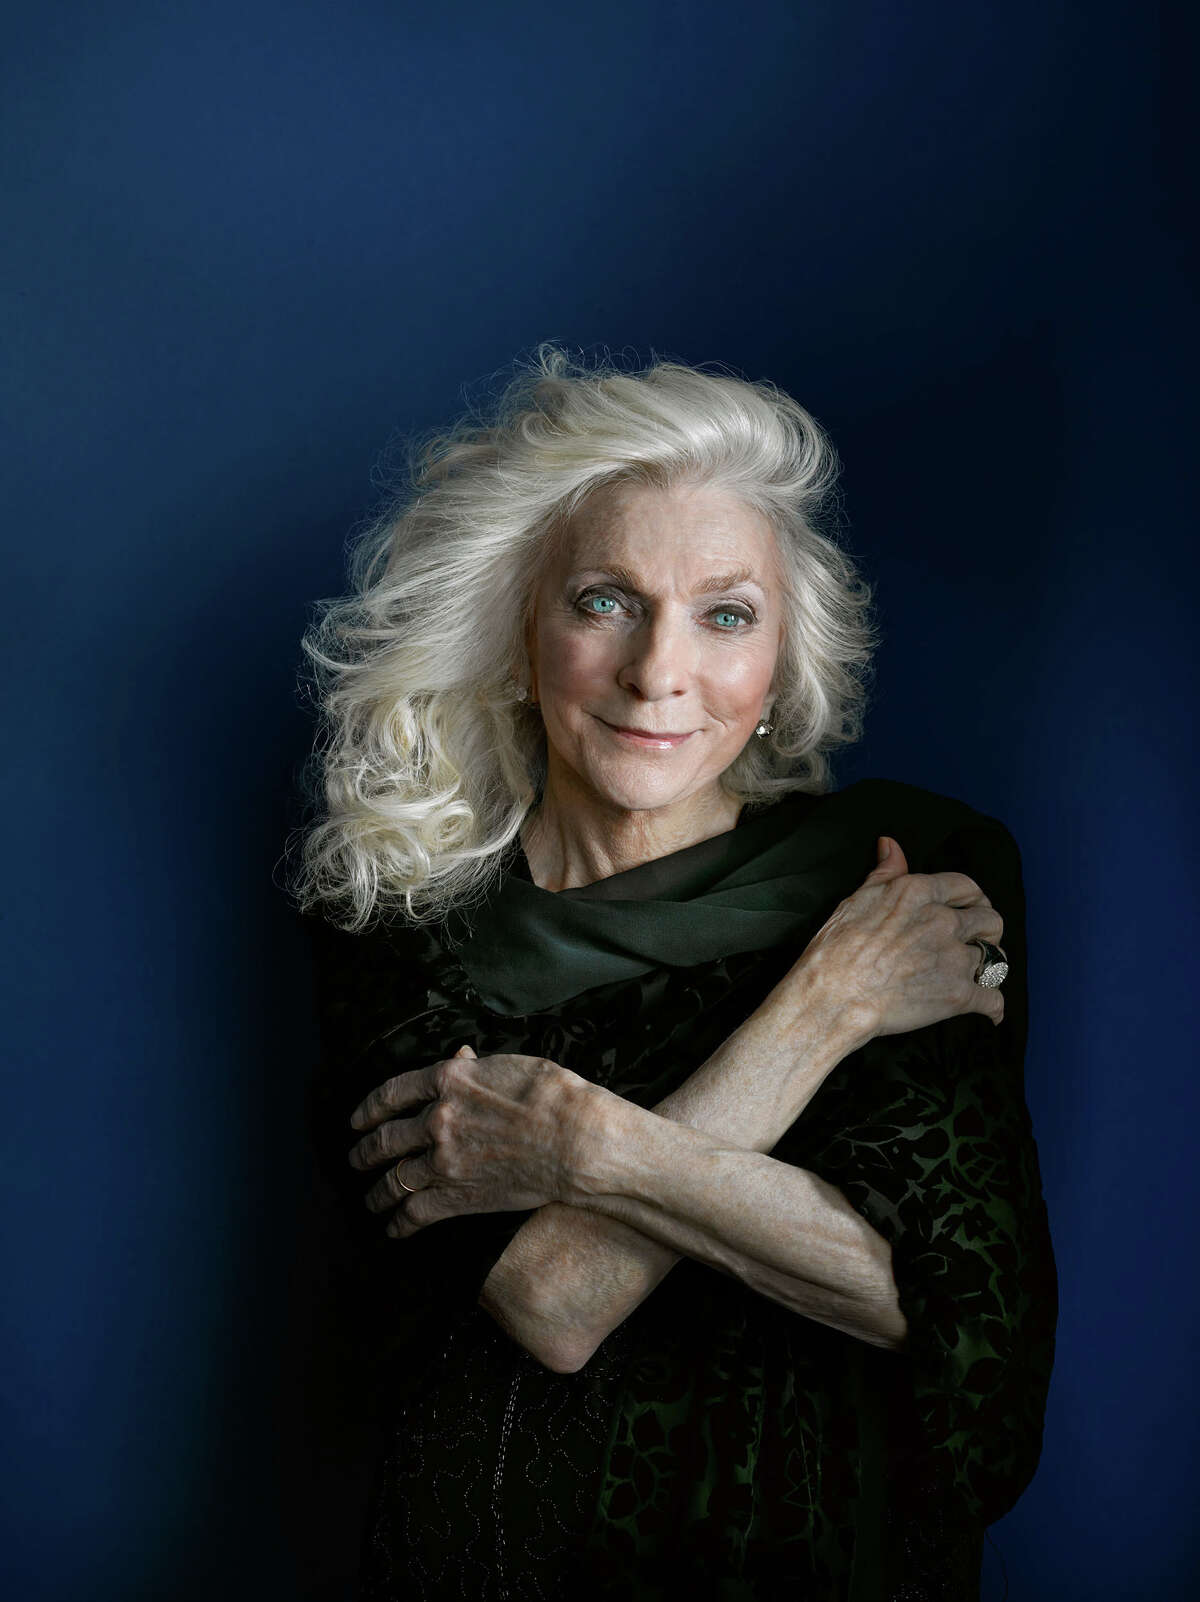 Grammy-winning singer and folk artist Judy Collins performs at the Ridgefield Playhouse on Saturday, June 11.